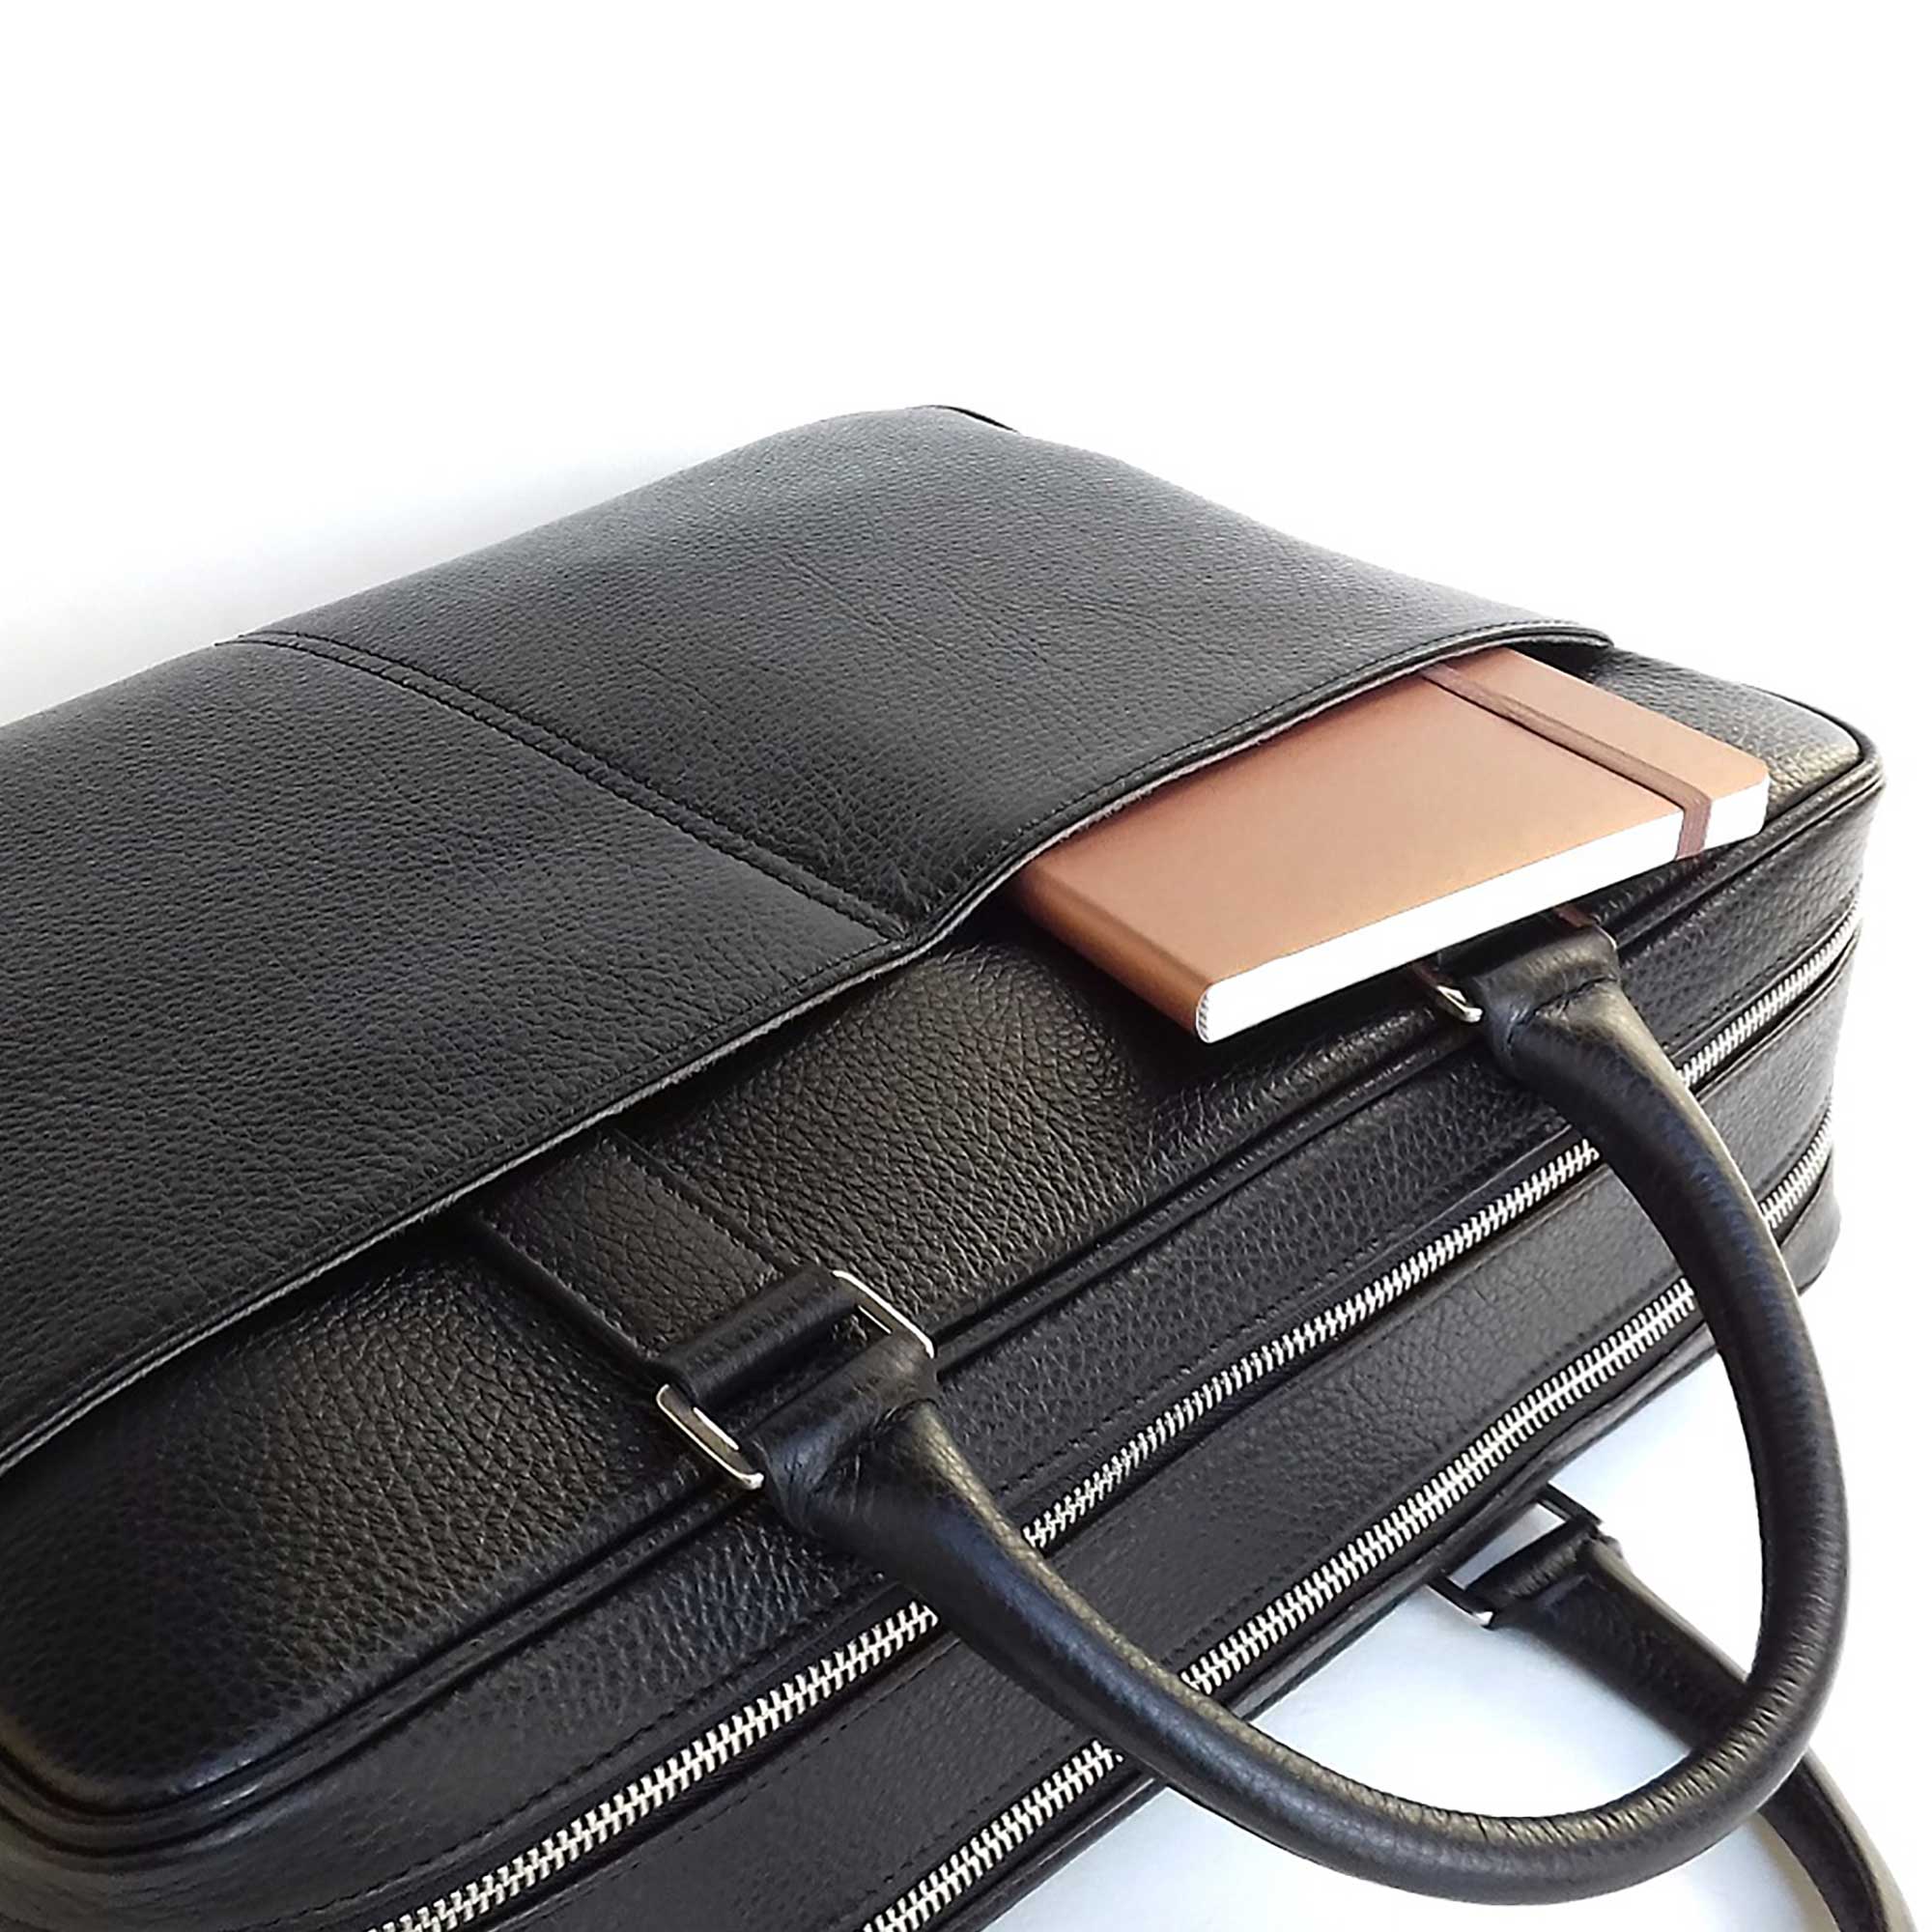 DiLoro Italian Leather Briefcases for Men | Made in Italy - Side View